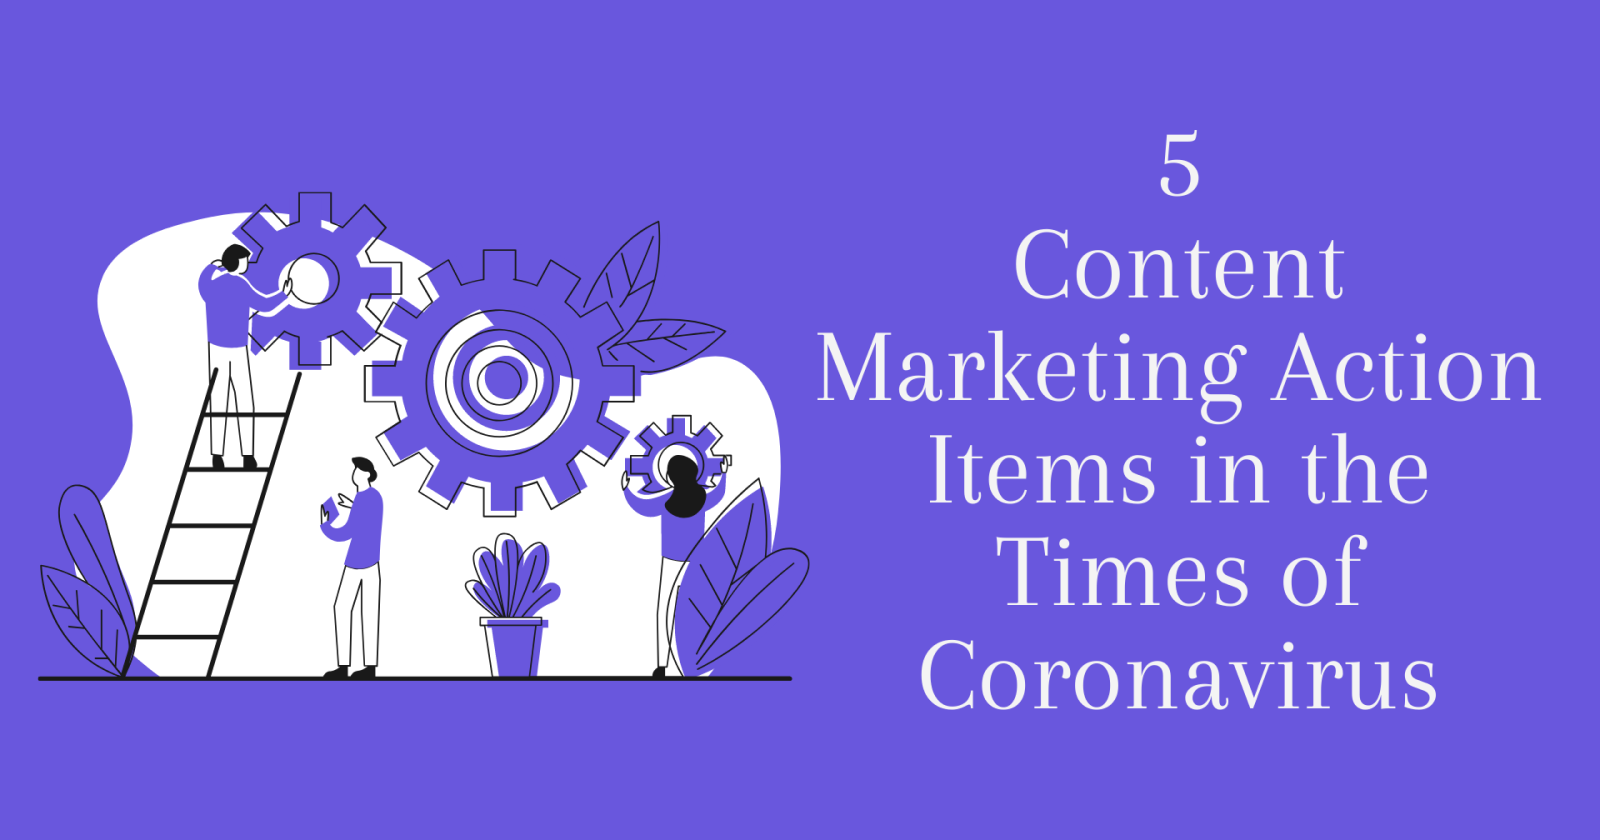 5-content-marketing-action-items-in-the-times-of-coronavirus3